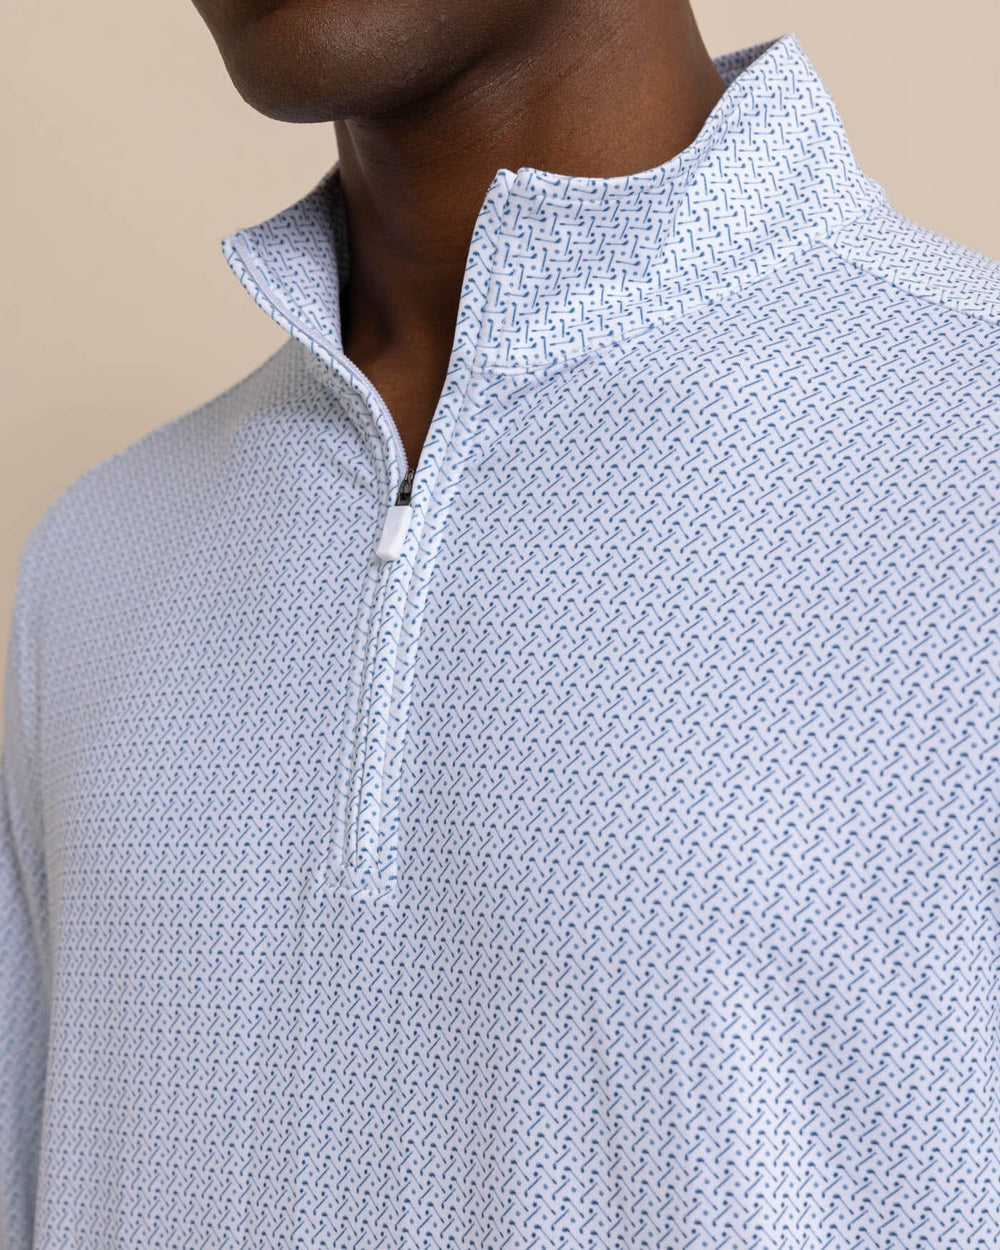 The detail view of the Southern Tide Clubbin It Print Cruiser Quarter Zip by Southern Tide - Classic White